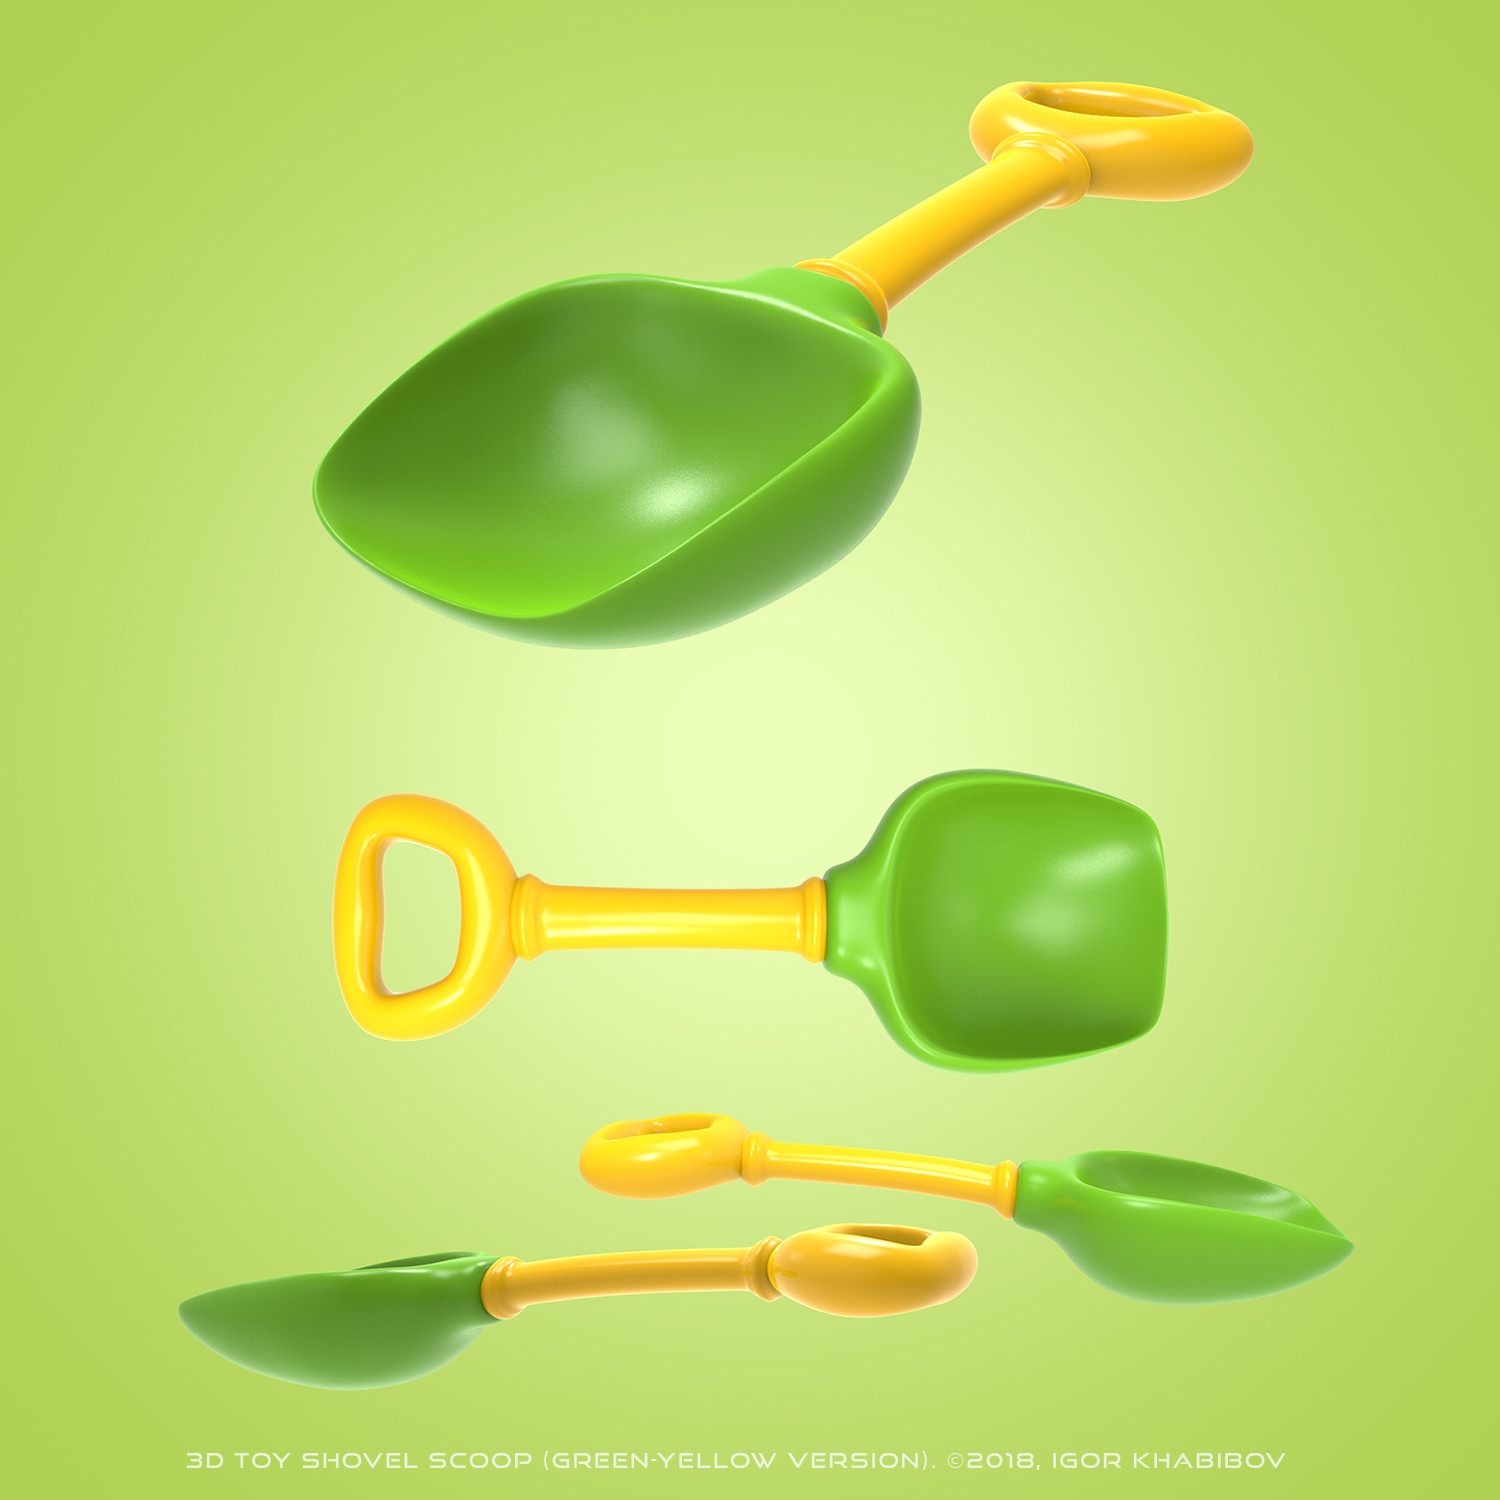 3D Toy Shovel Scoop
Contest winner (1st place) at DesignCrowd. 